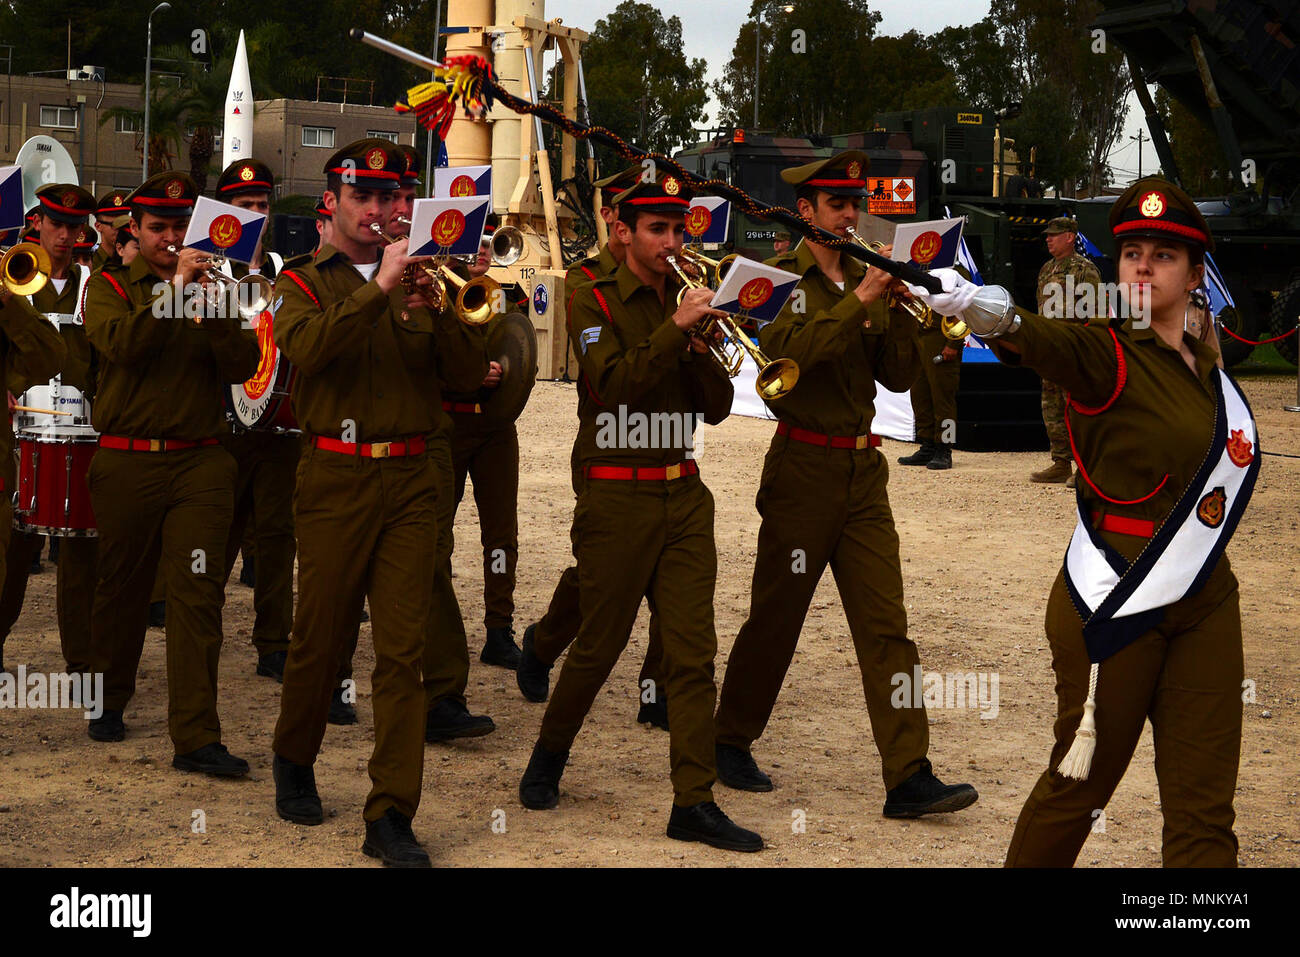 The Israeli Defense Force band performs during a closing ceremony at an exercise site in Israel for Juniper Cobra March 15. Juniper Cobra 18 is a ballistic missile defense joint U.S.-Israel exercise that uses computer simulations to train forces  and enhance interoperability. Stock Photo